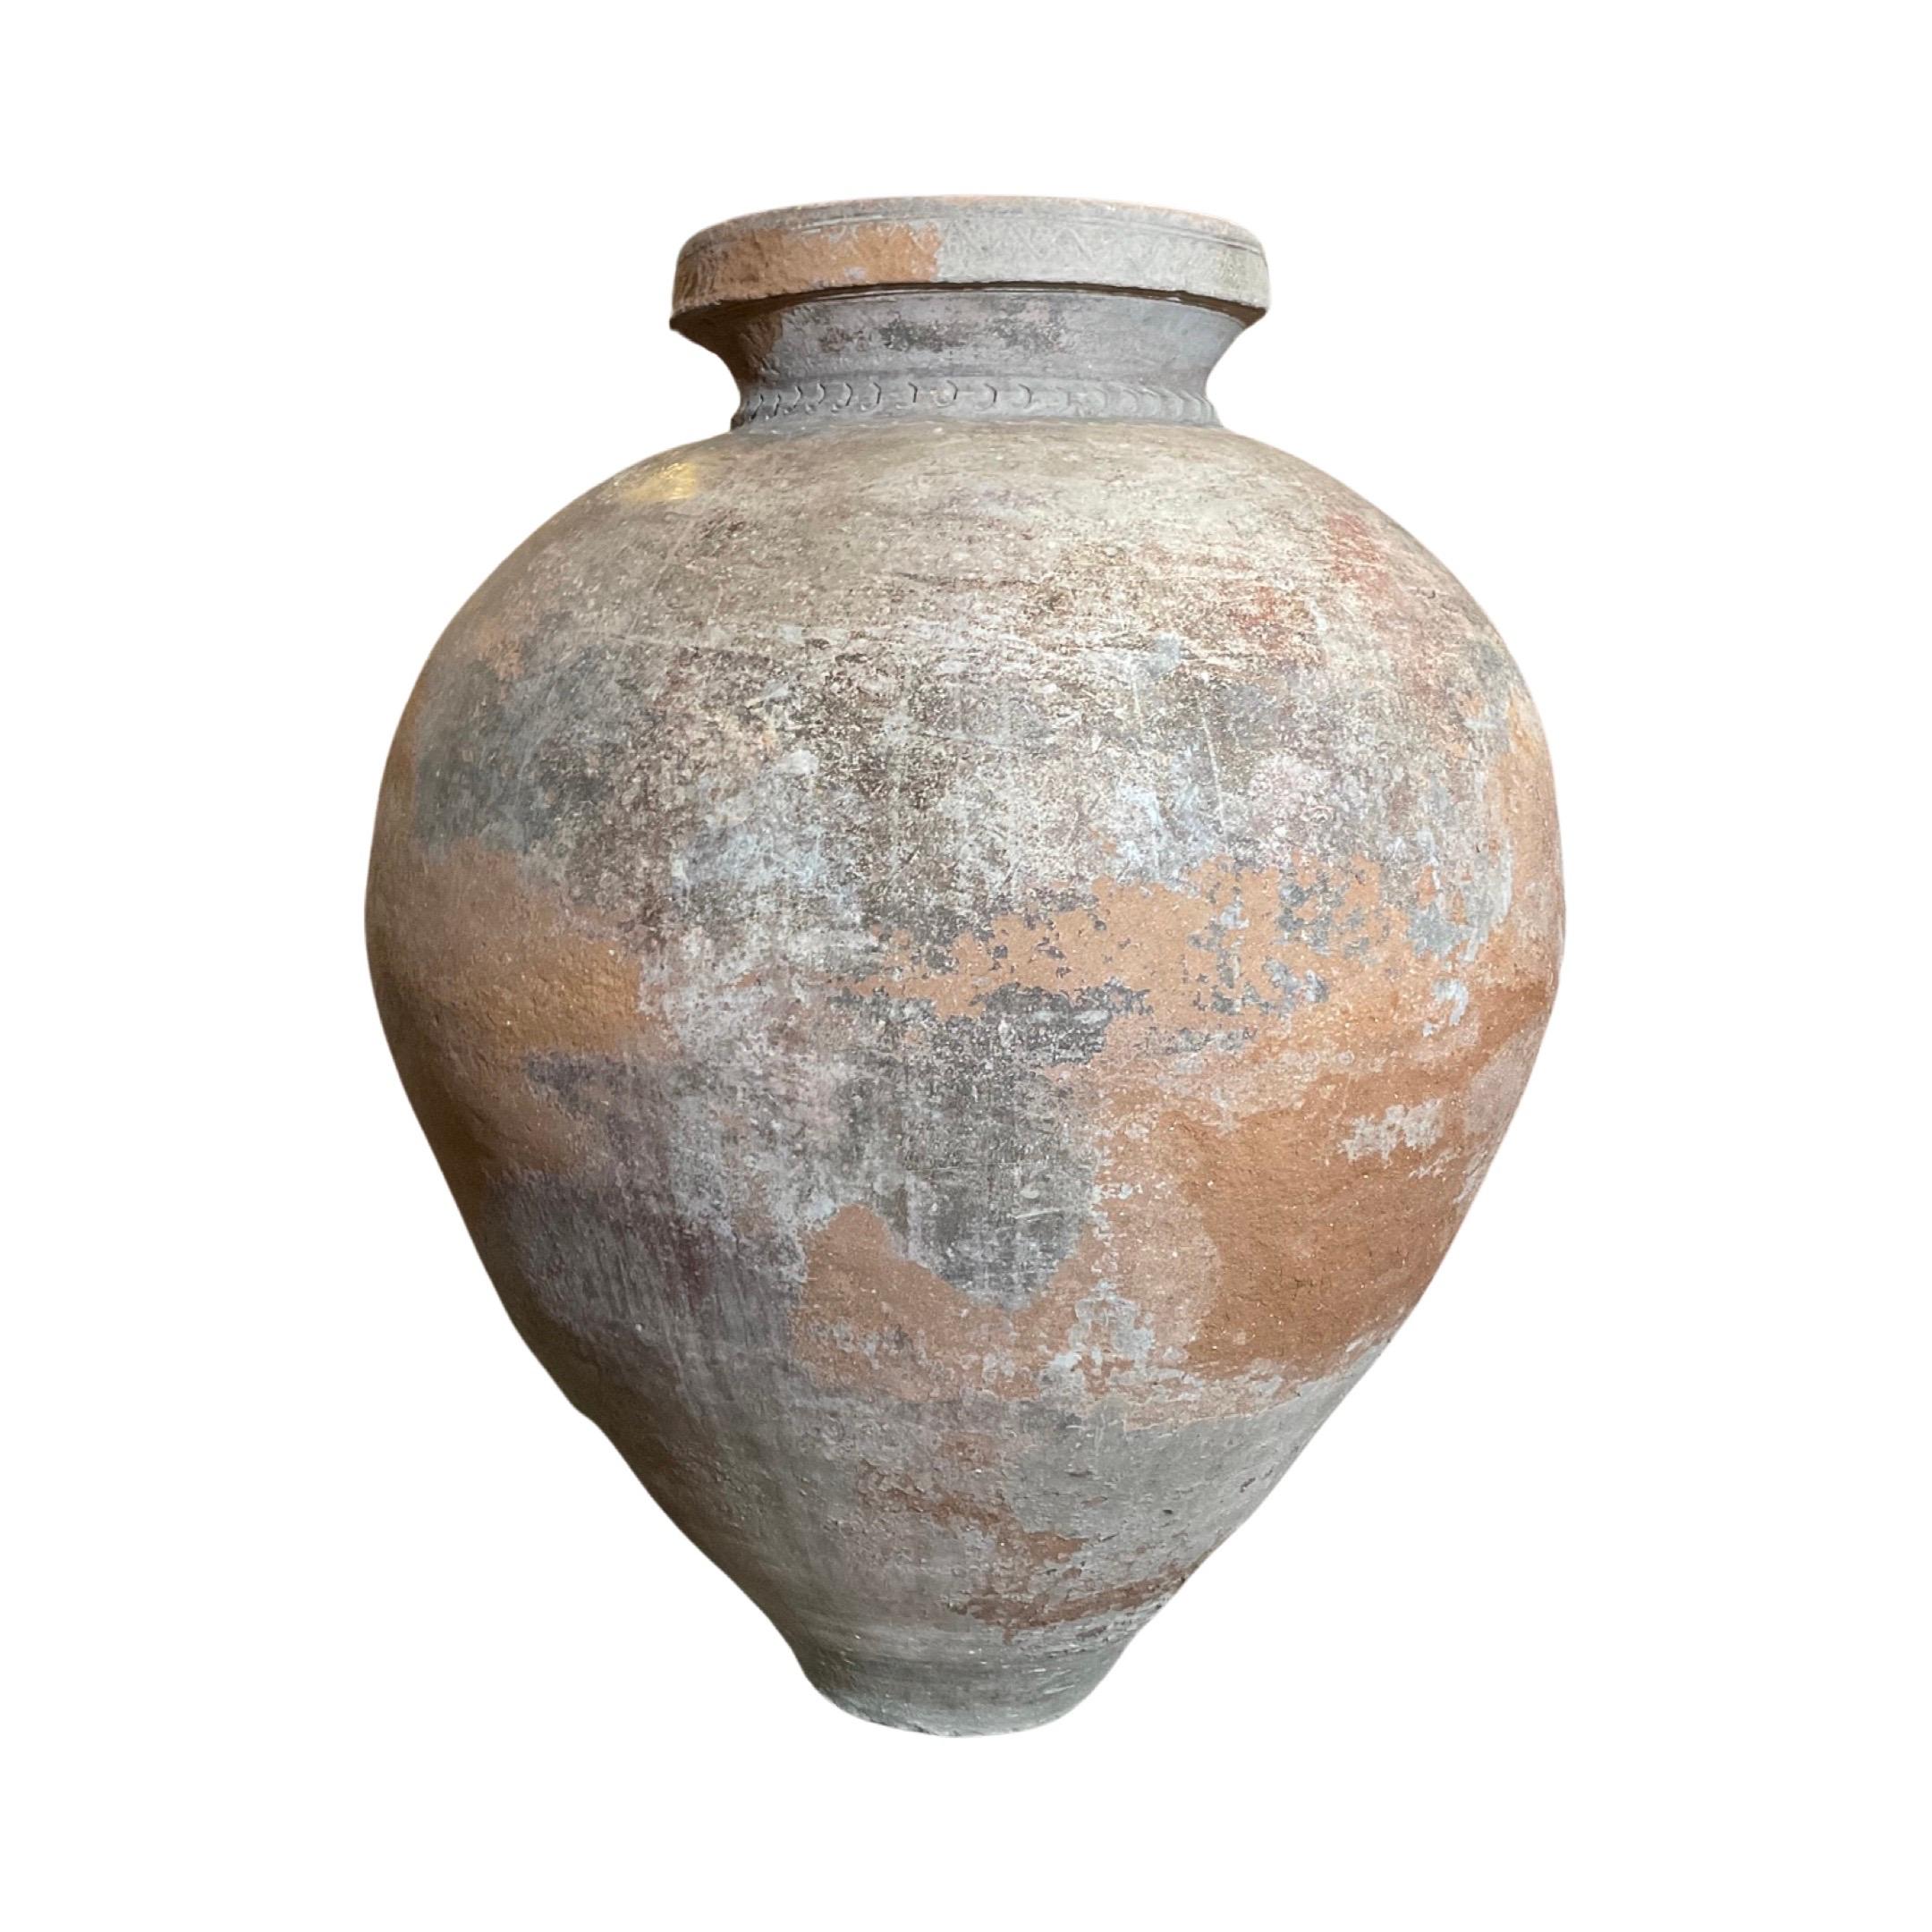 This stunning Portuguese terracotta vessel dates back to the 18th century and features intricately detailed carvings surrounding the opening. Crafted from terracotta, its unique design is sure to make a statement in any home.